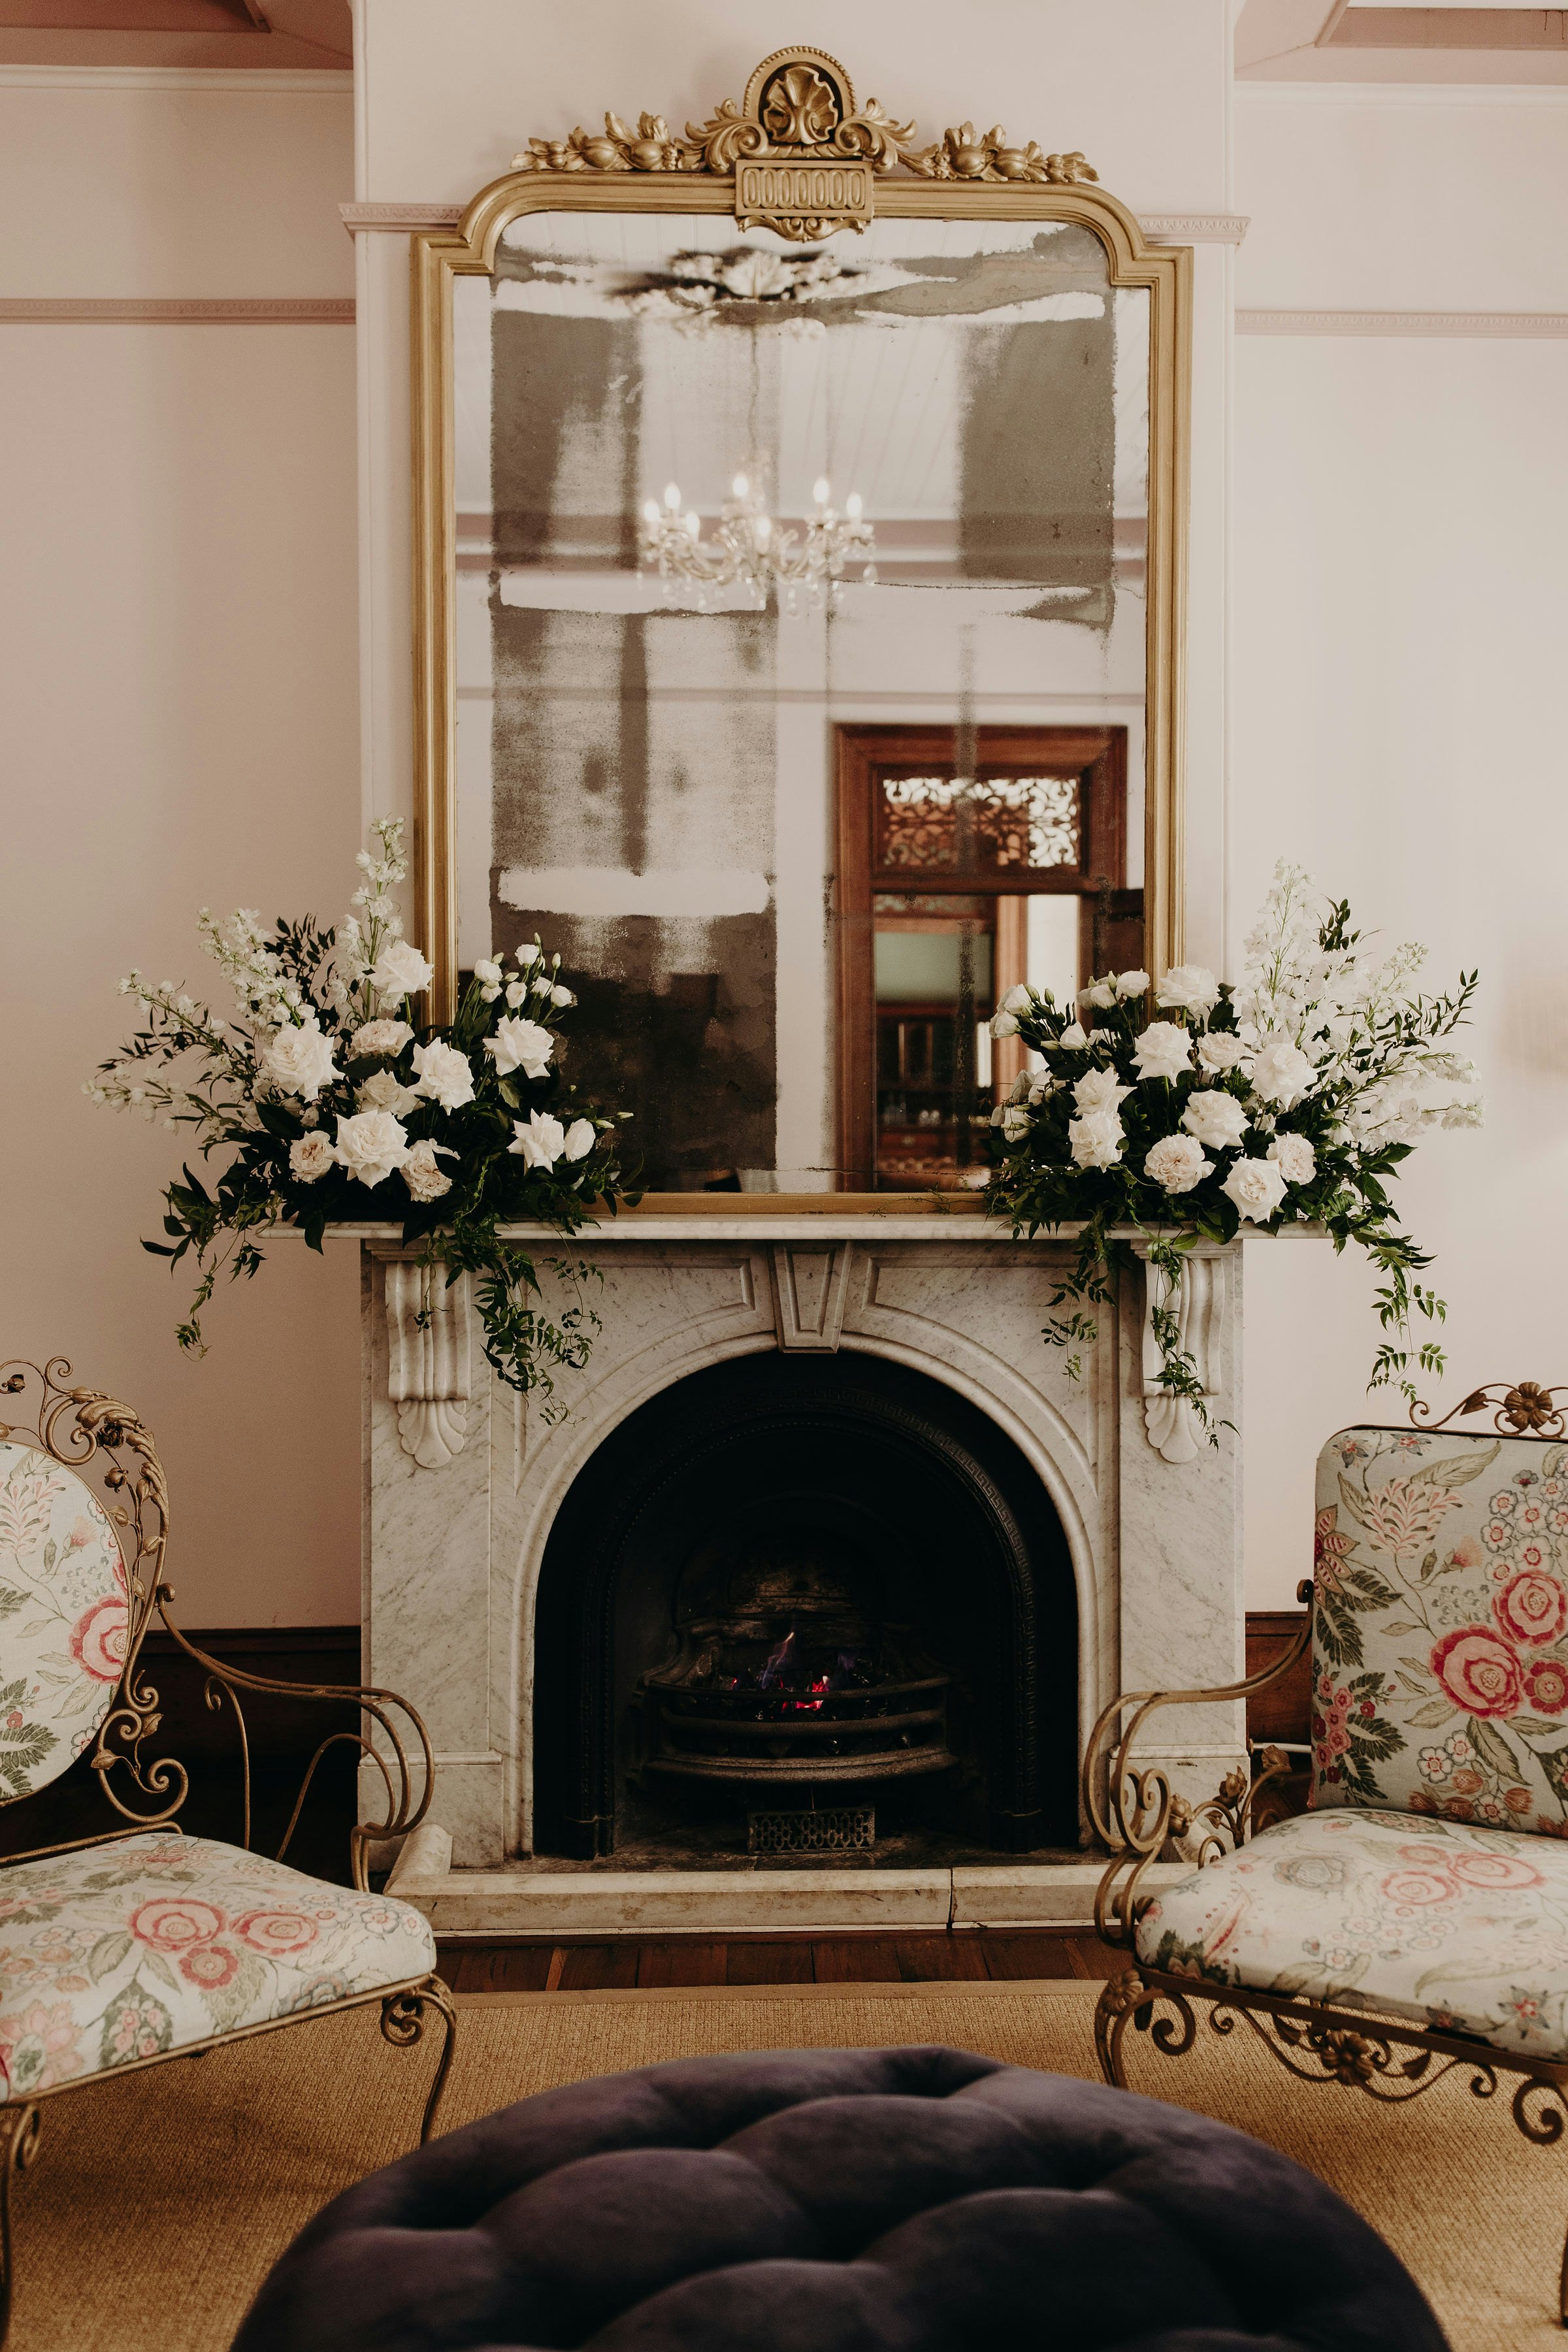 Flowers on a fireplace mantle